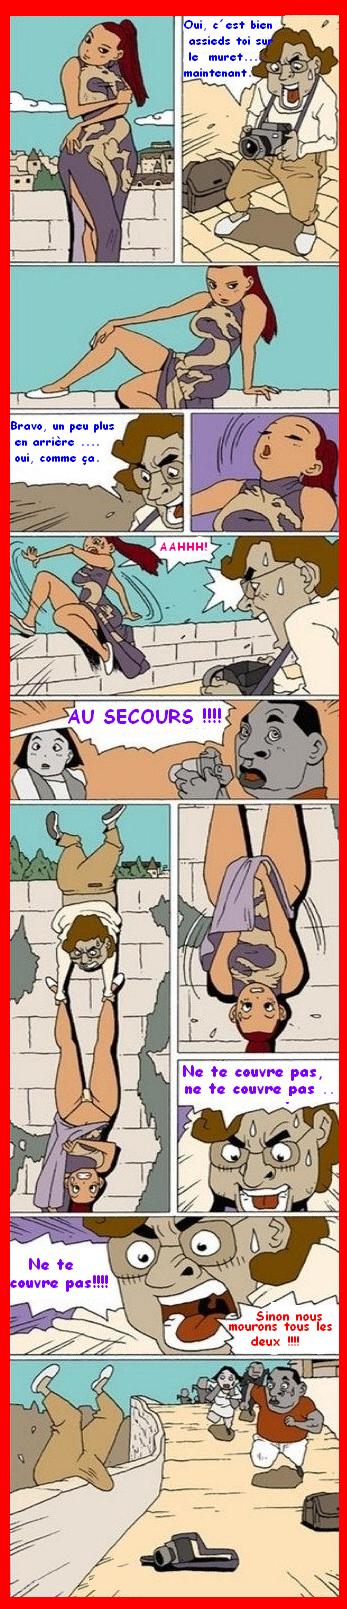 blagues ... - Page 10 Humour12